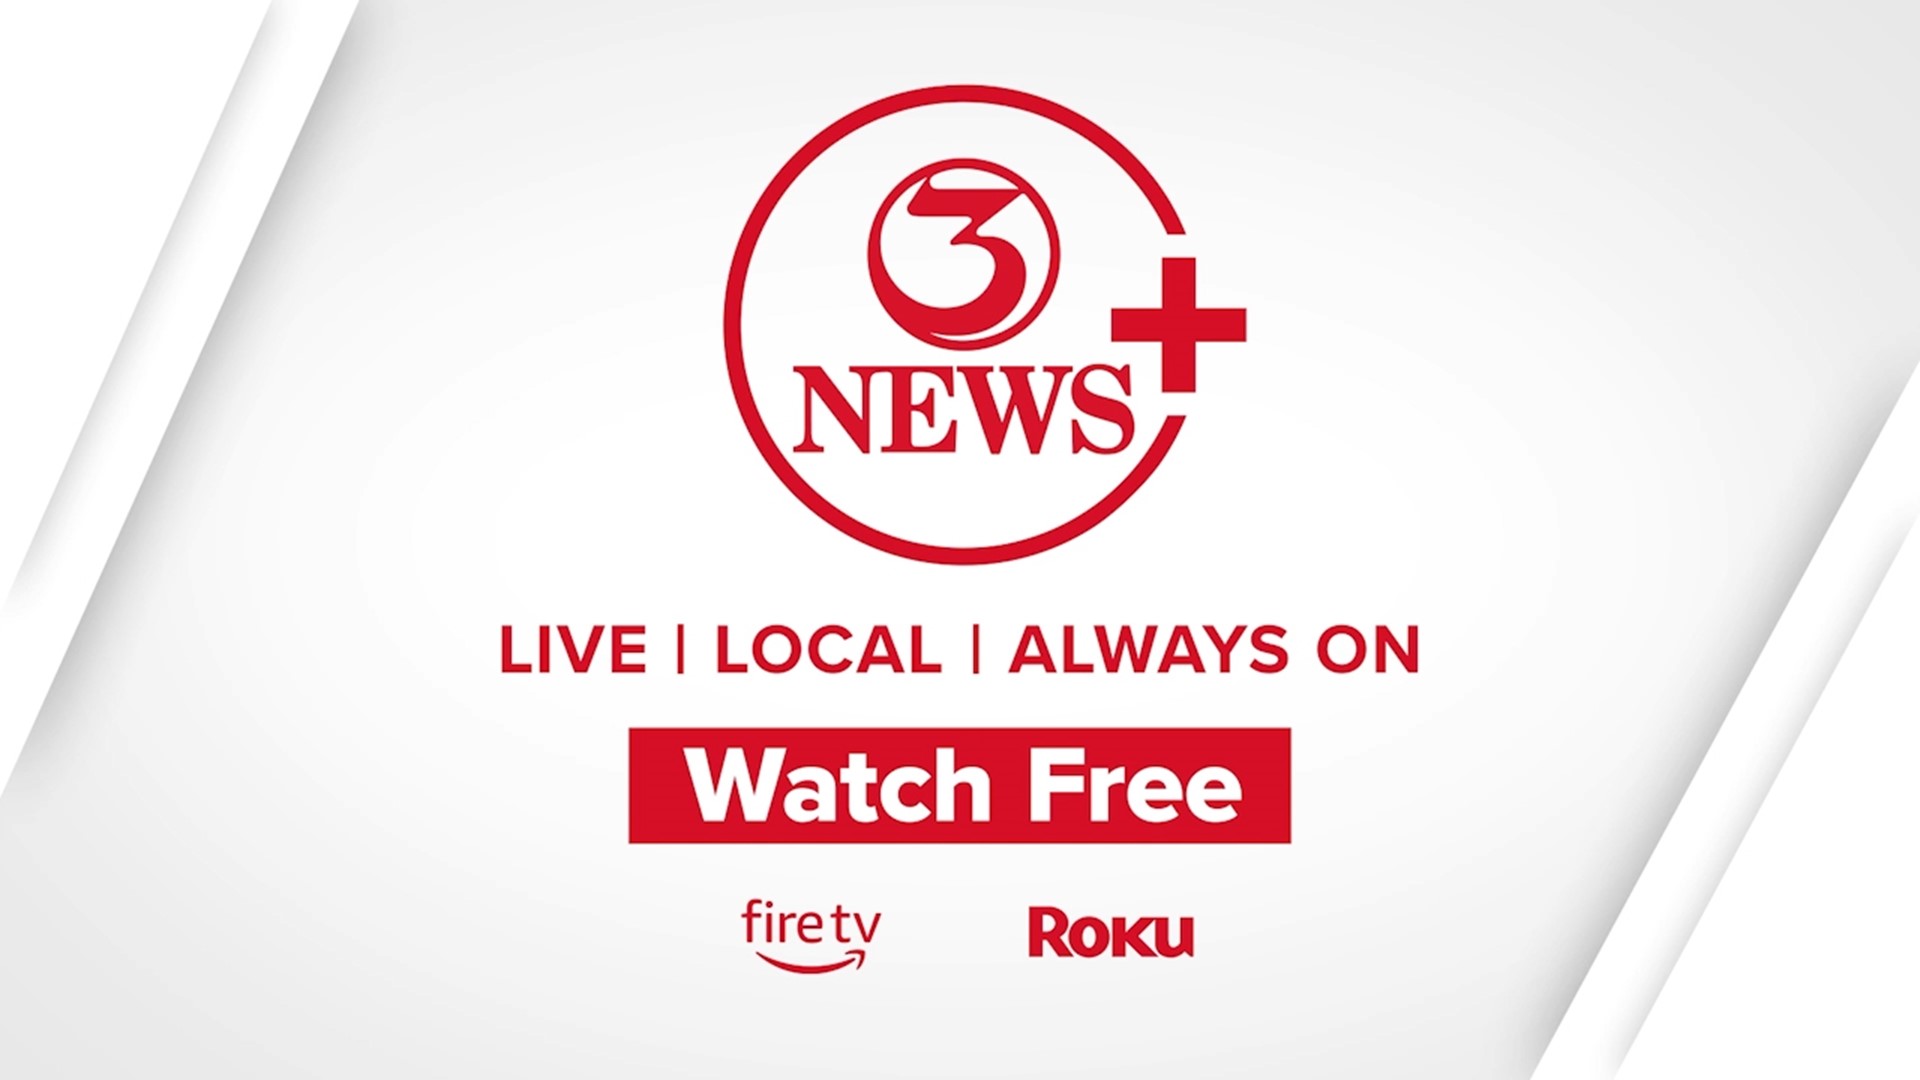 The new 3NEWS+ app is now available on Roku and Amazon Fire, bringing you 3NEWS content Live and on demand.